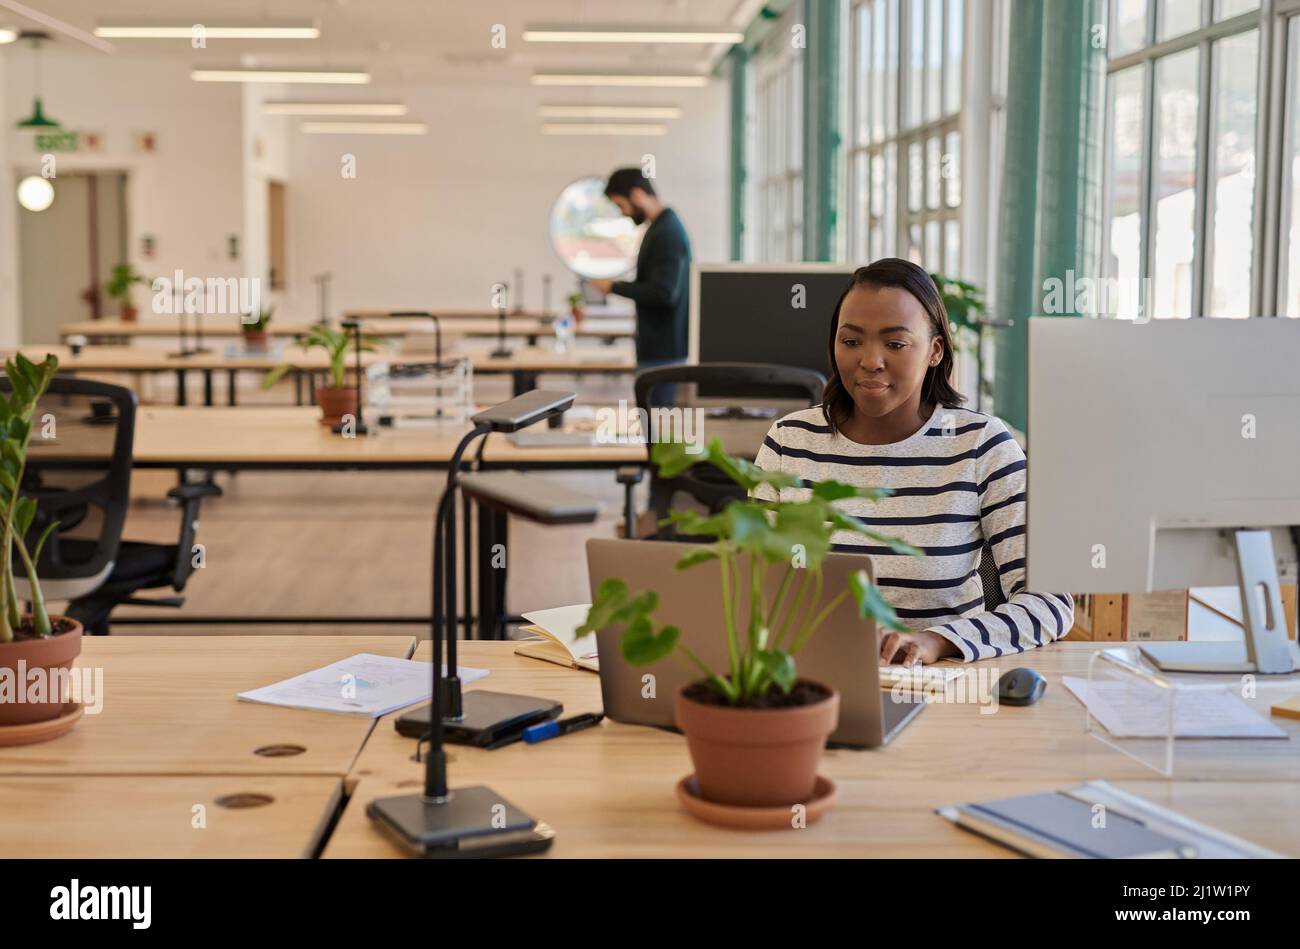 Focused young African businesswoman working at her desk in an office Stock Photo